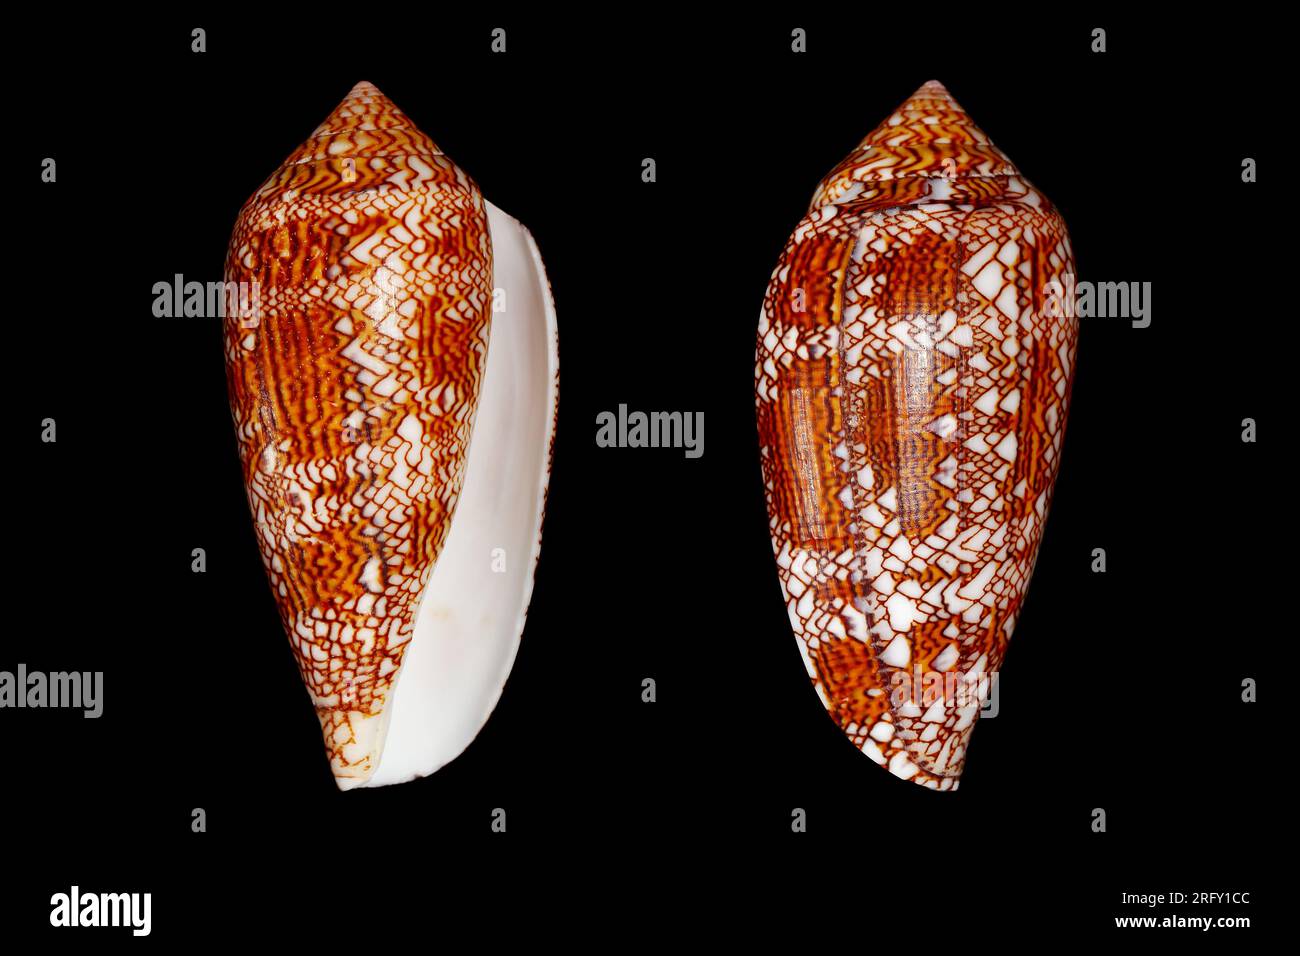 Textile cone, Cloth of gold cone (Cylinder/Conus textile) sea snail is the venomous sea snail that can kill human from tropical Indo-Pacific sea Stock Photo